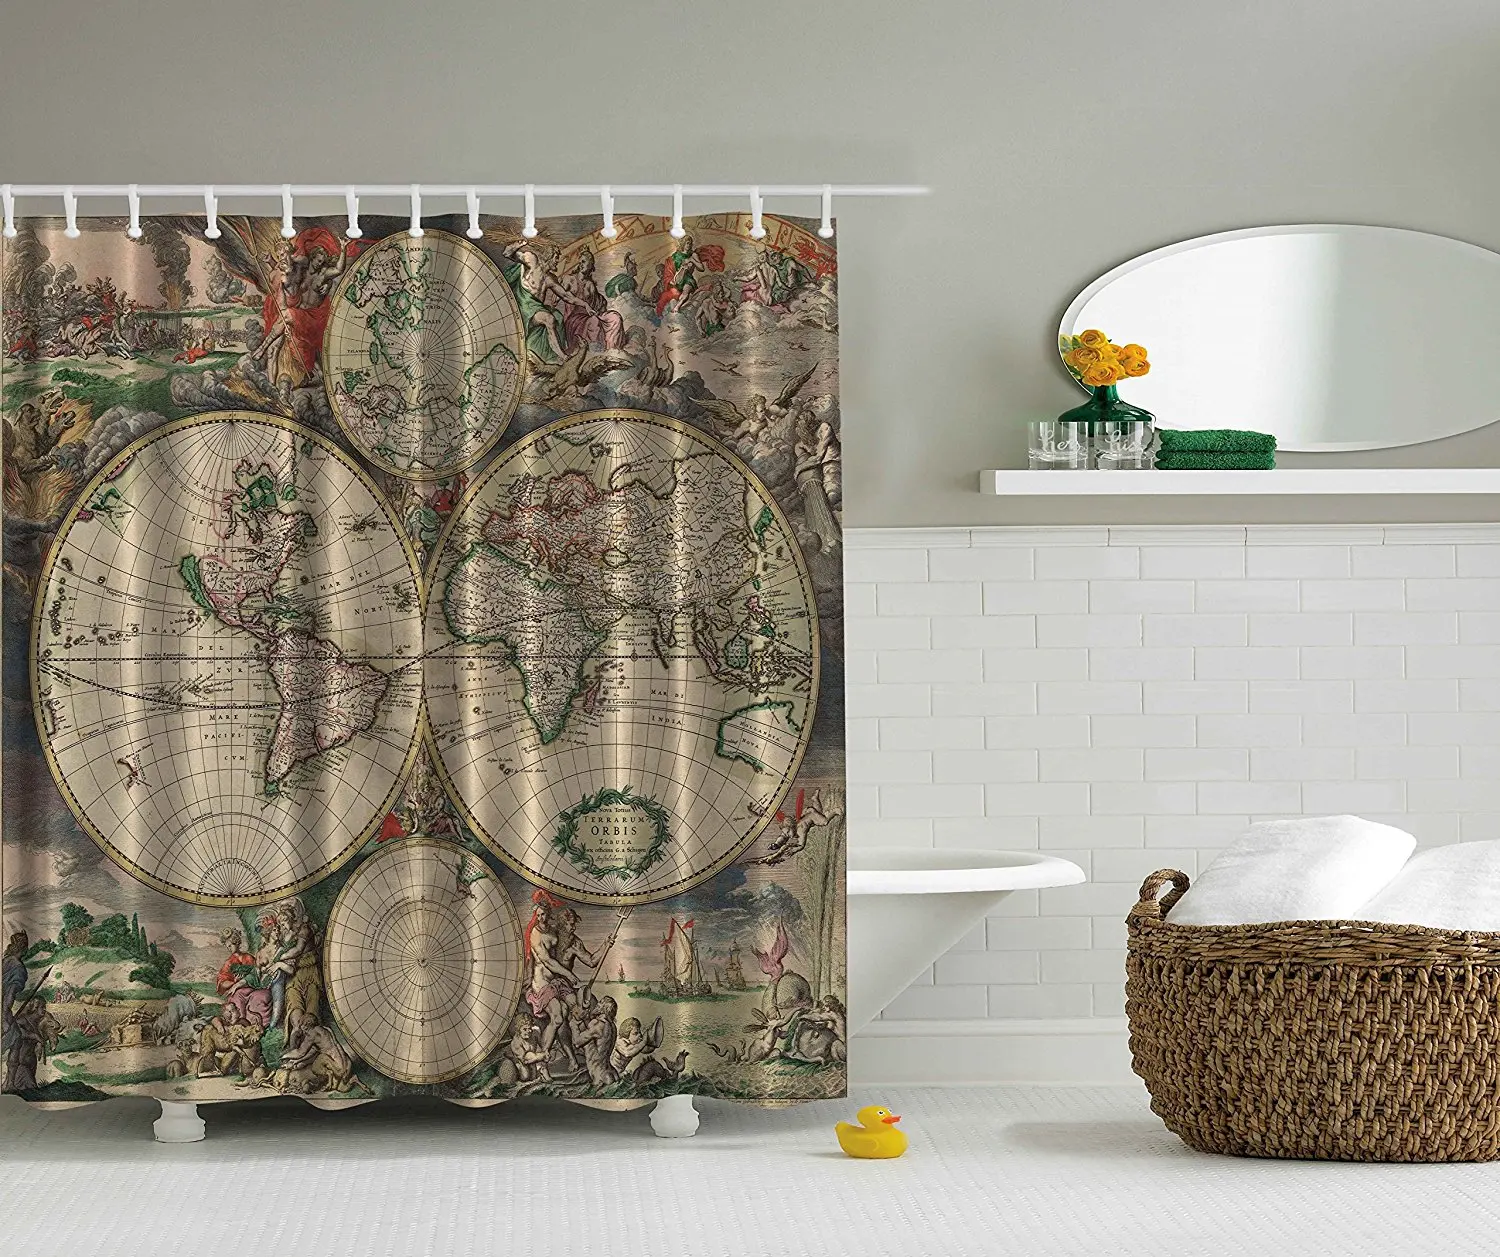 Memory Home Old World Map Print Polyester Fabric Shower Curtain Beige Green Gray Orange Bathroom